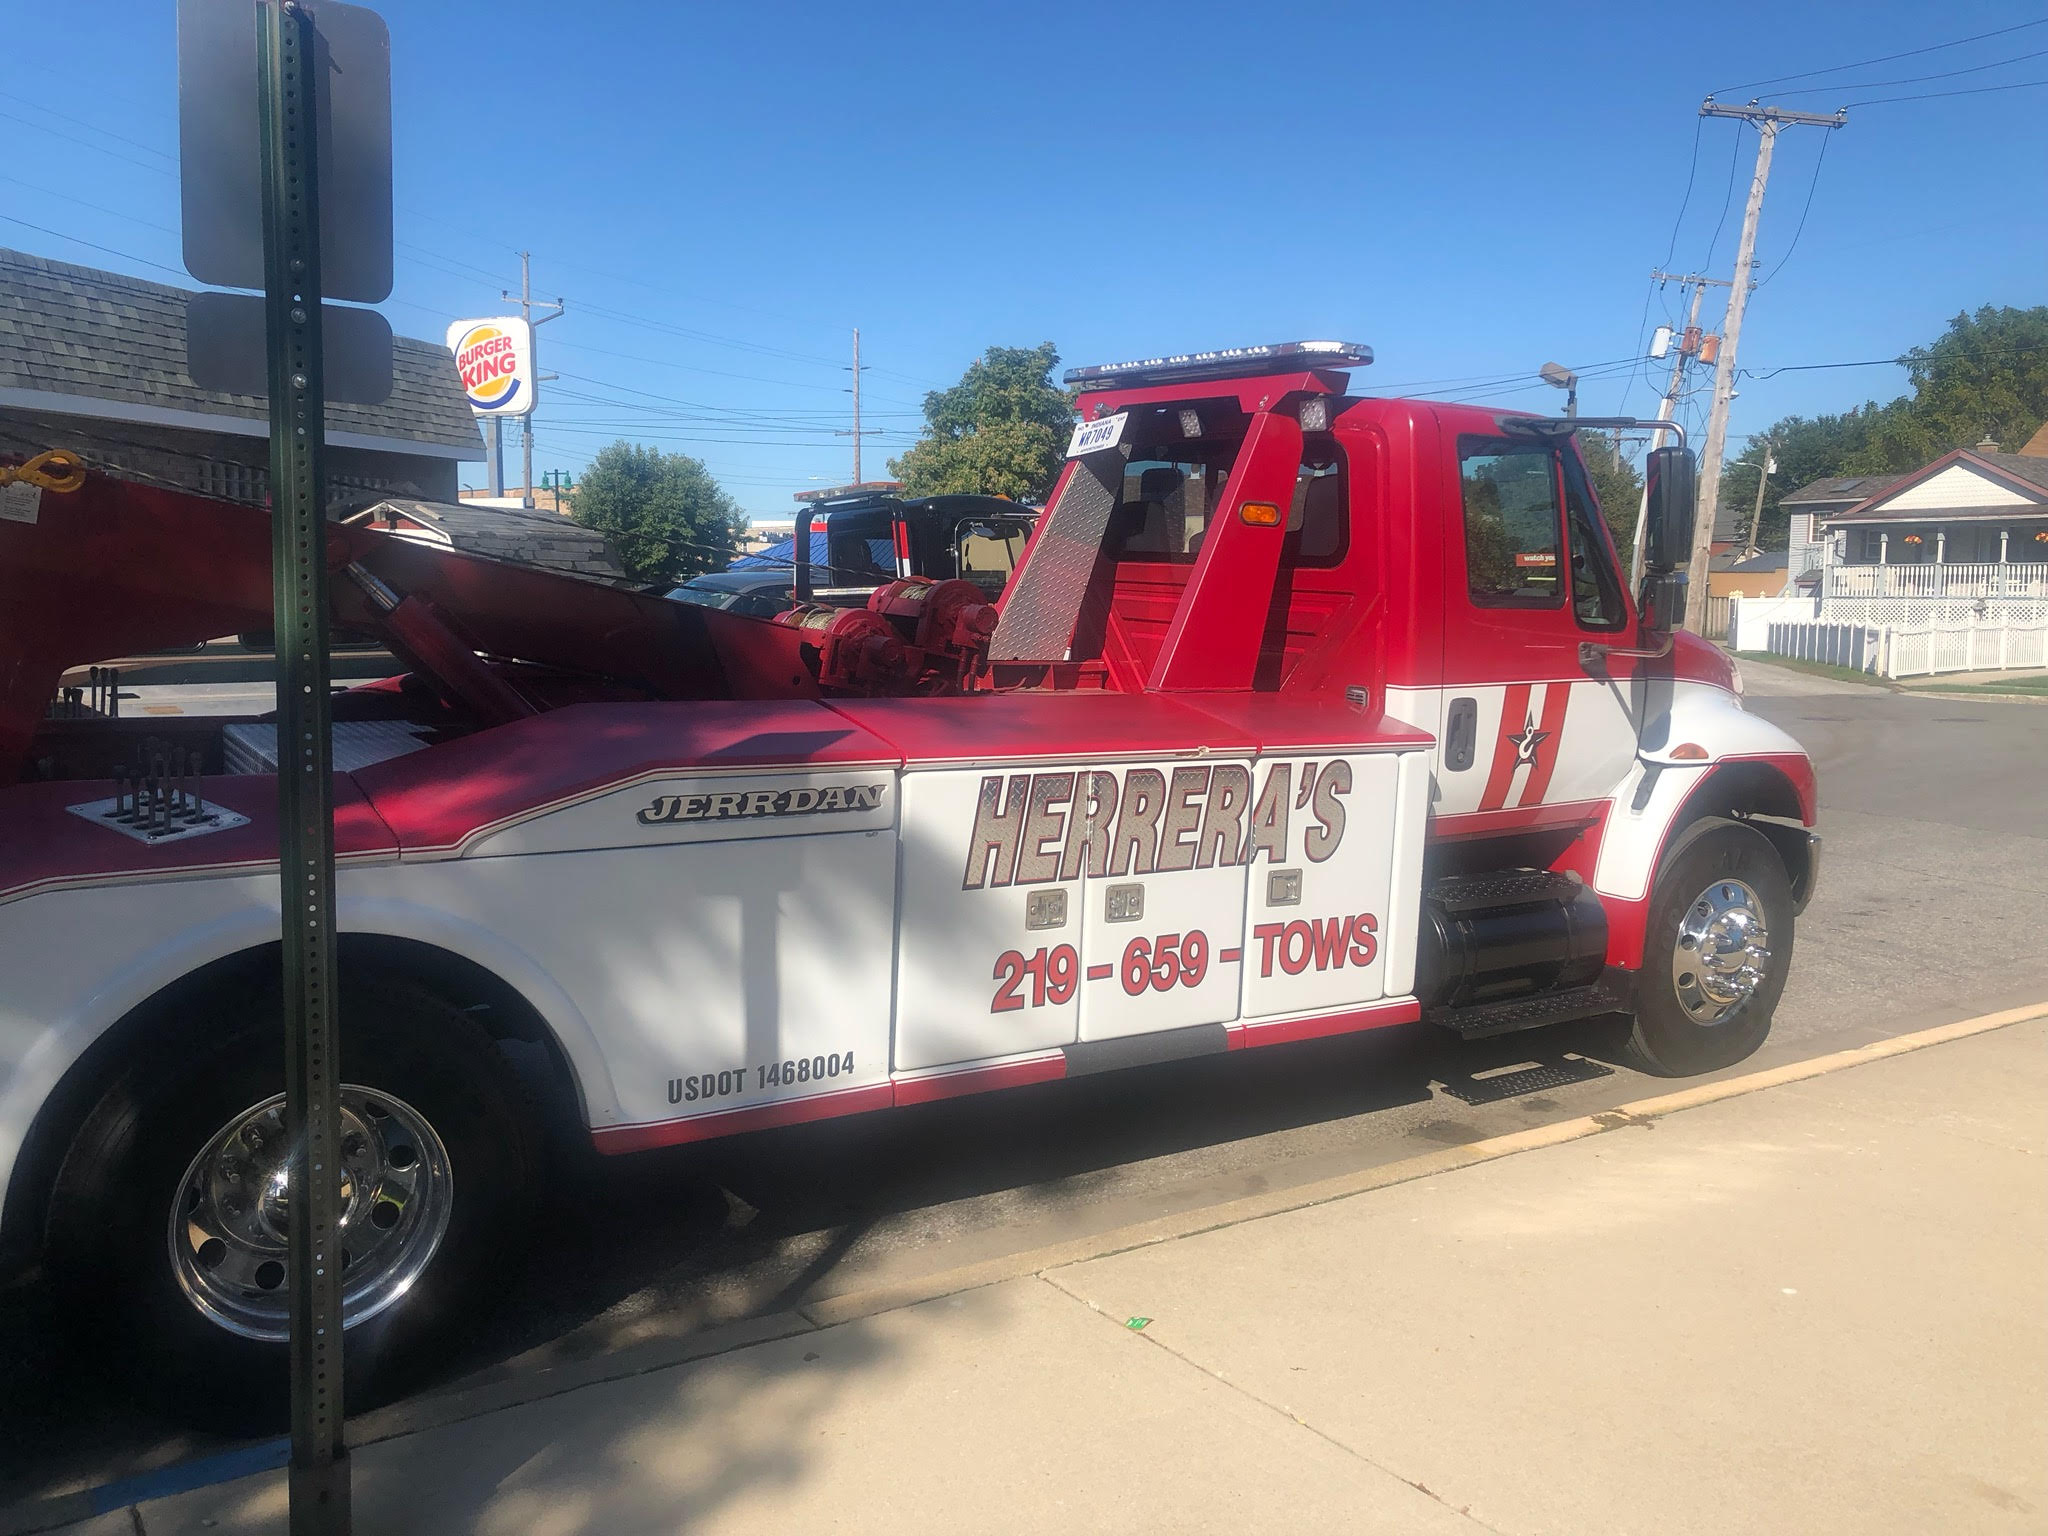 Herrera’s Towing is a comprehensive automotive emergency service provider serving northwest Indiana and the greater Chicago area. In business since 1977, we strive to provide premium towing, auto repair, and light truck repair services to our community. Our team has decades of experience working on automobiles. As “car people” before anything else, we will always afford your vehicle the same care and respect we would give to our own.

We work around the clock to make ourselves available to you whenever you may need it, offering live dispatch 24/7. We specialize in light-to-medium-duty towing and can perform all sorts of repairs on most makes and models. Our experts aren’t just licensed and highly trained—they’re also kind people who will give you comfort and peace of mind throughout each step of the process. Call Herrera’s Towing today to see what we can do for you!